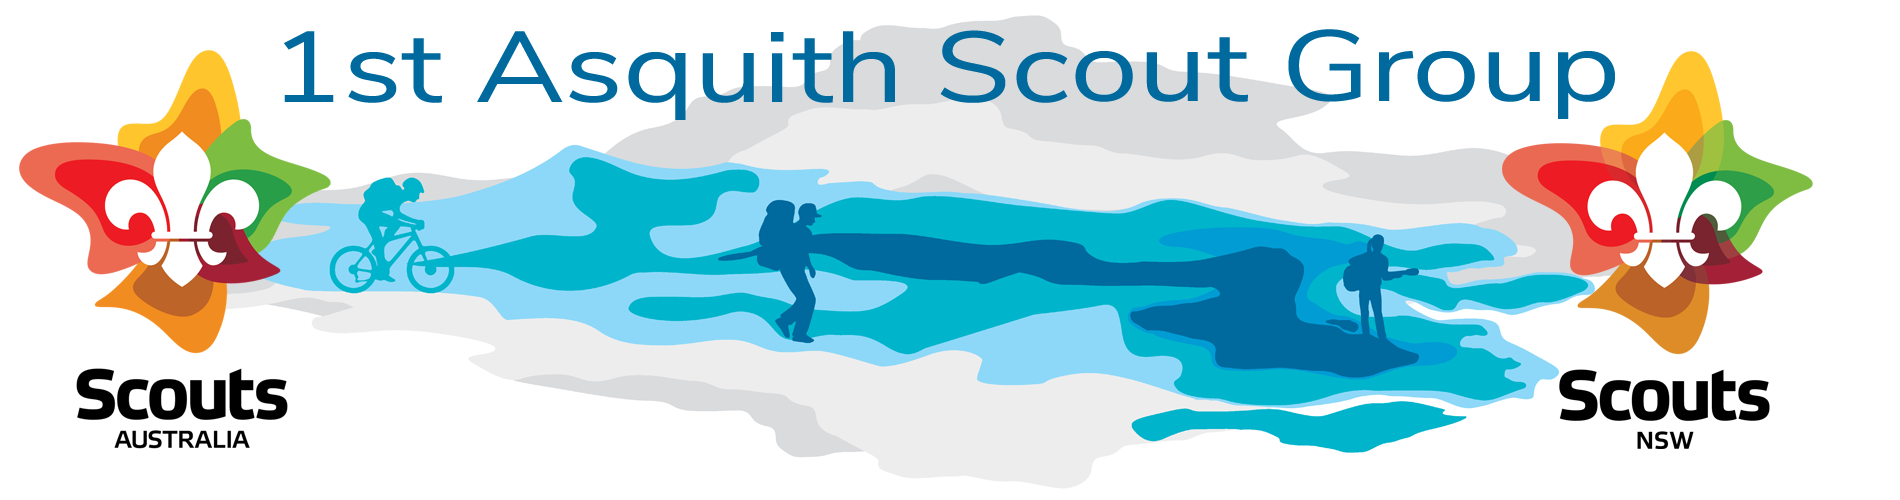 1st Asquith Scout Group